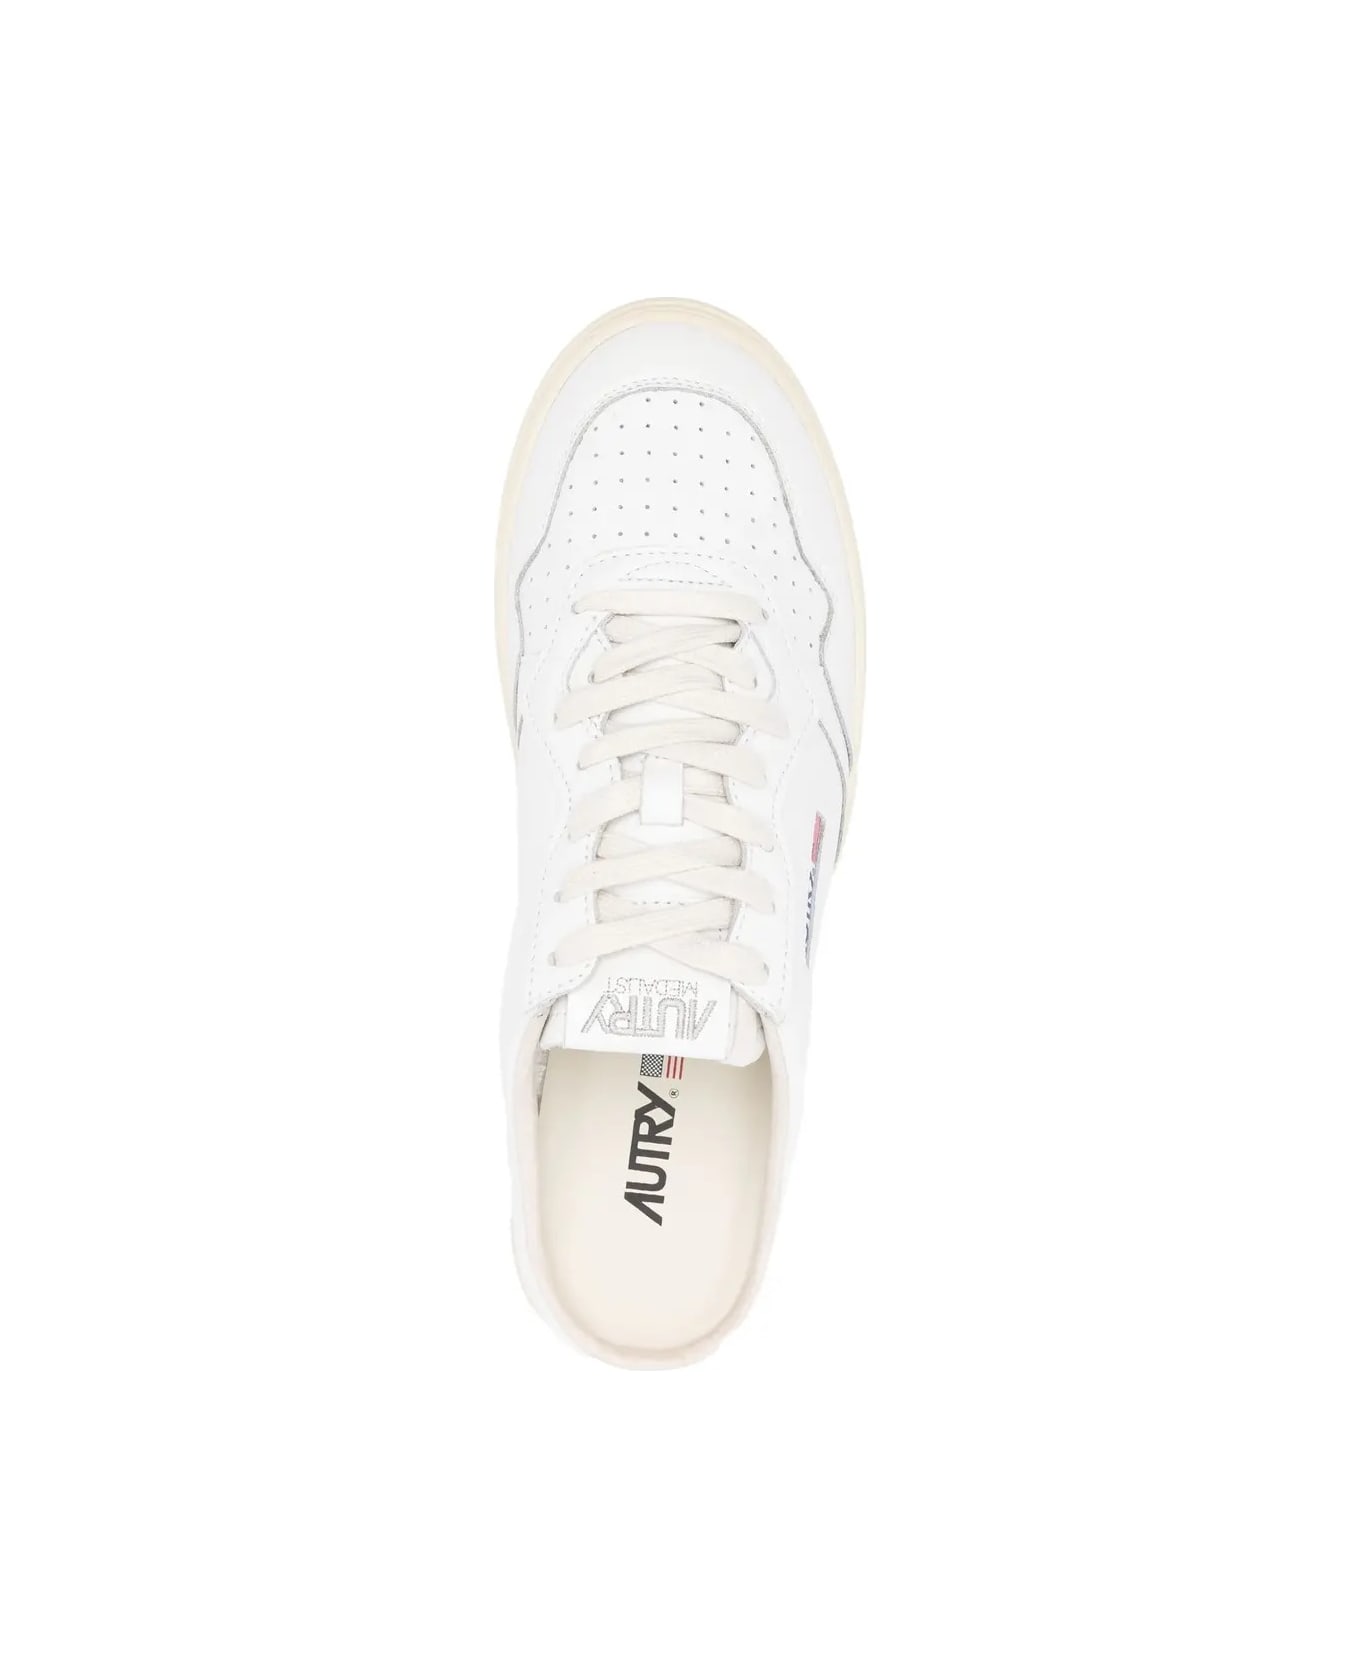 Autry White Medalist Mule Sneakers - White/white